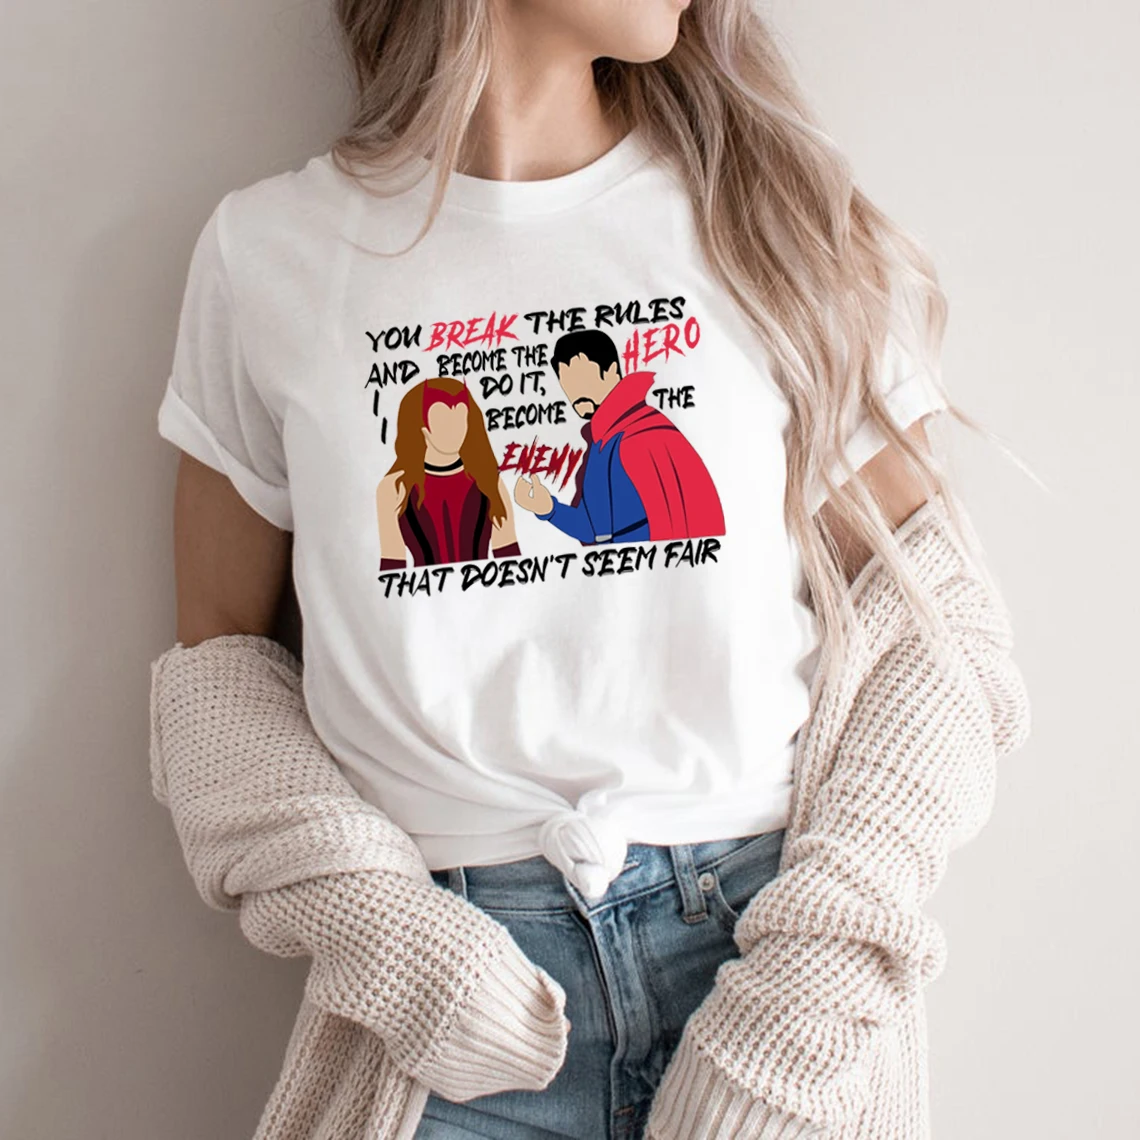 Dr Strange 2 Wanda T Shirt Scarlet Witch 2022 Maximoff 1989 T-shirt Multiverse of Madness Tshirts Tops for Men and Women